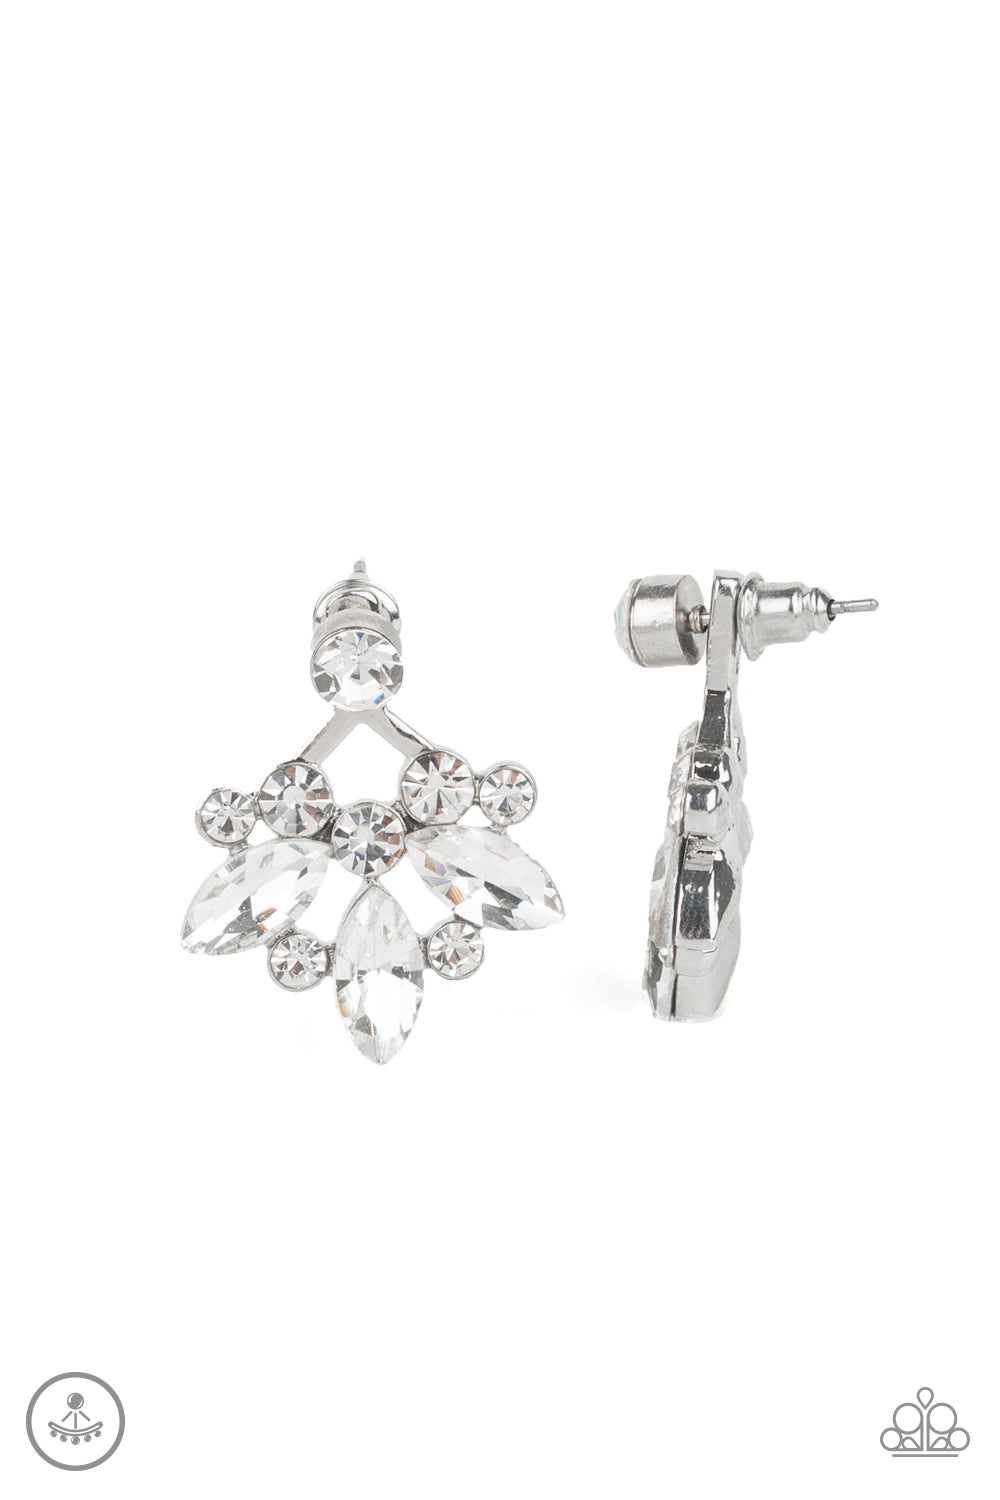 A solitaire white rhinestone attaches to a double-sided post, designed to fasten behind the ear. Radiating with a fringe of round and marquise style rhinestones, the double sided-post peeks out beneath the ear for a glamorous finish. Earring attaches to a standard post fitting.